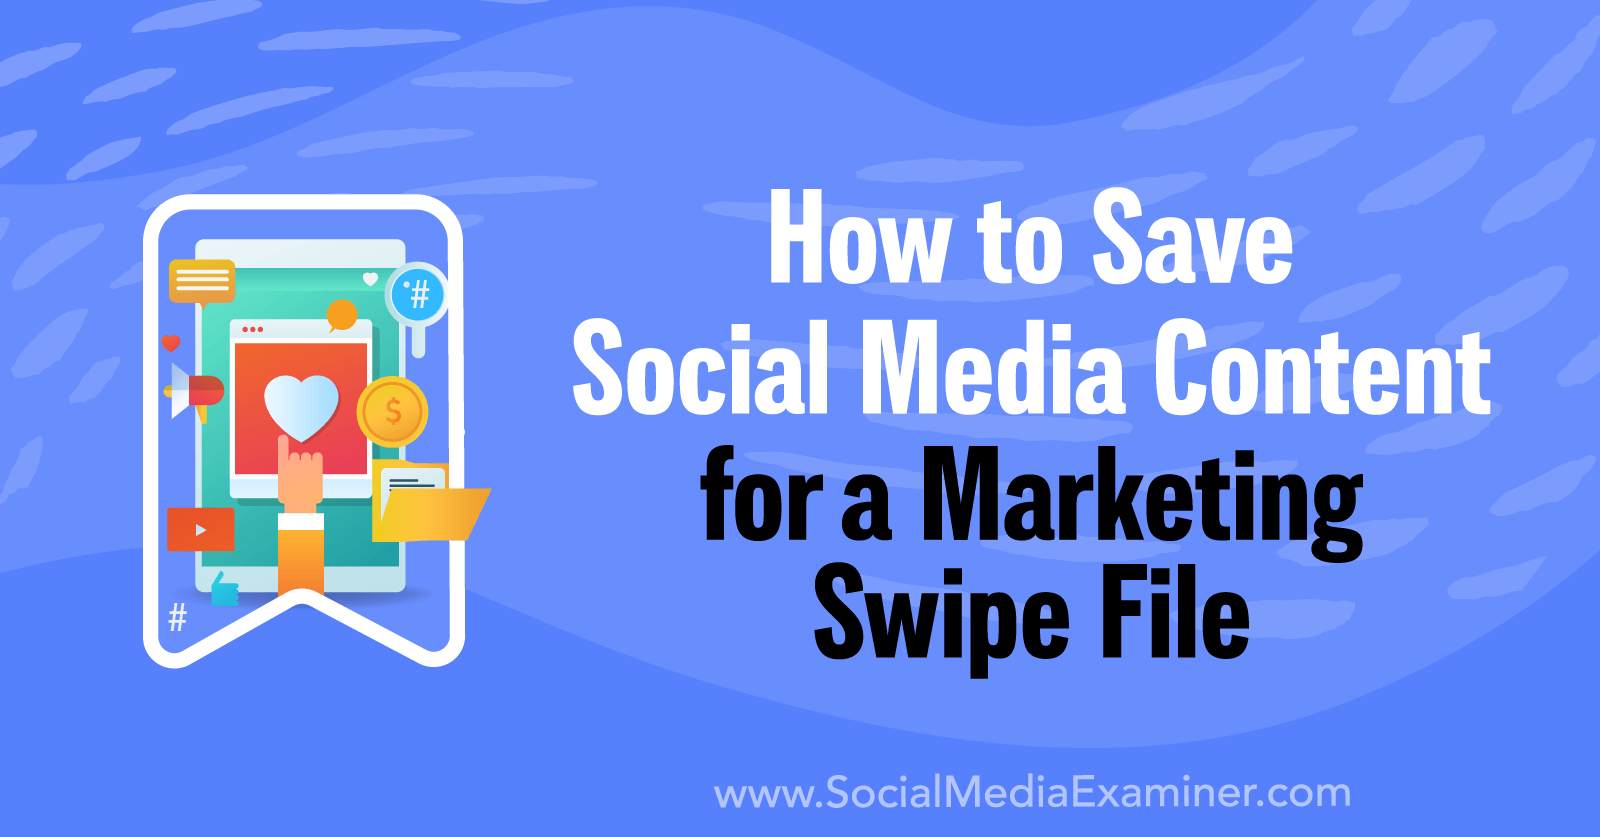 How to Save Social Media Content for a Marketing Swipe File-Social Media Examiner